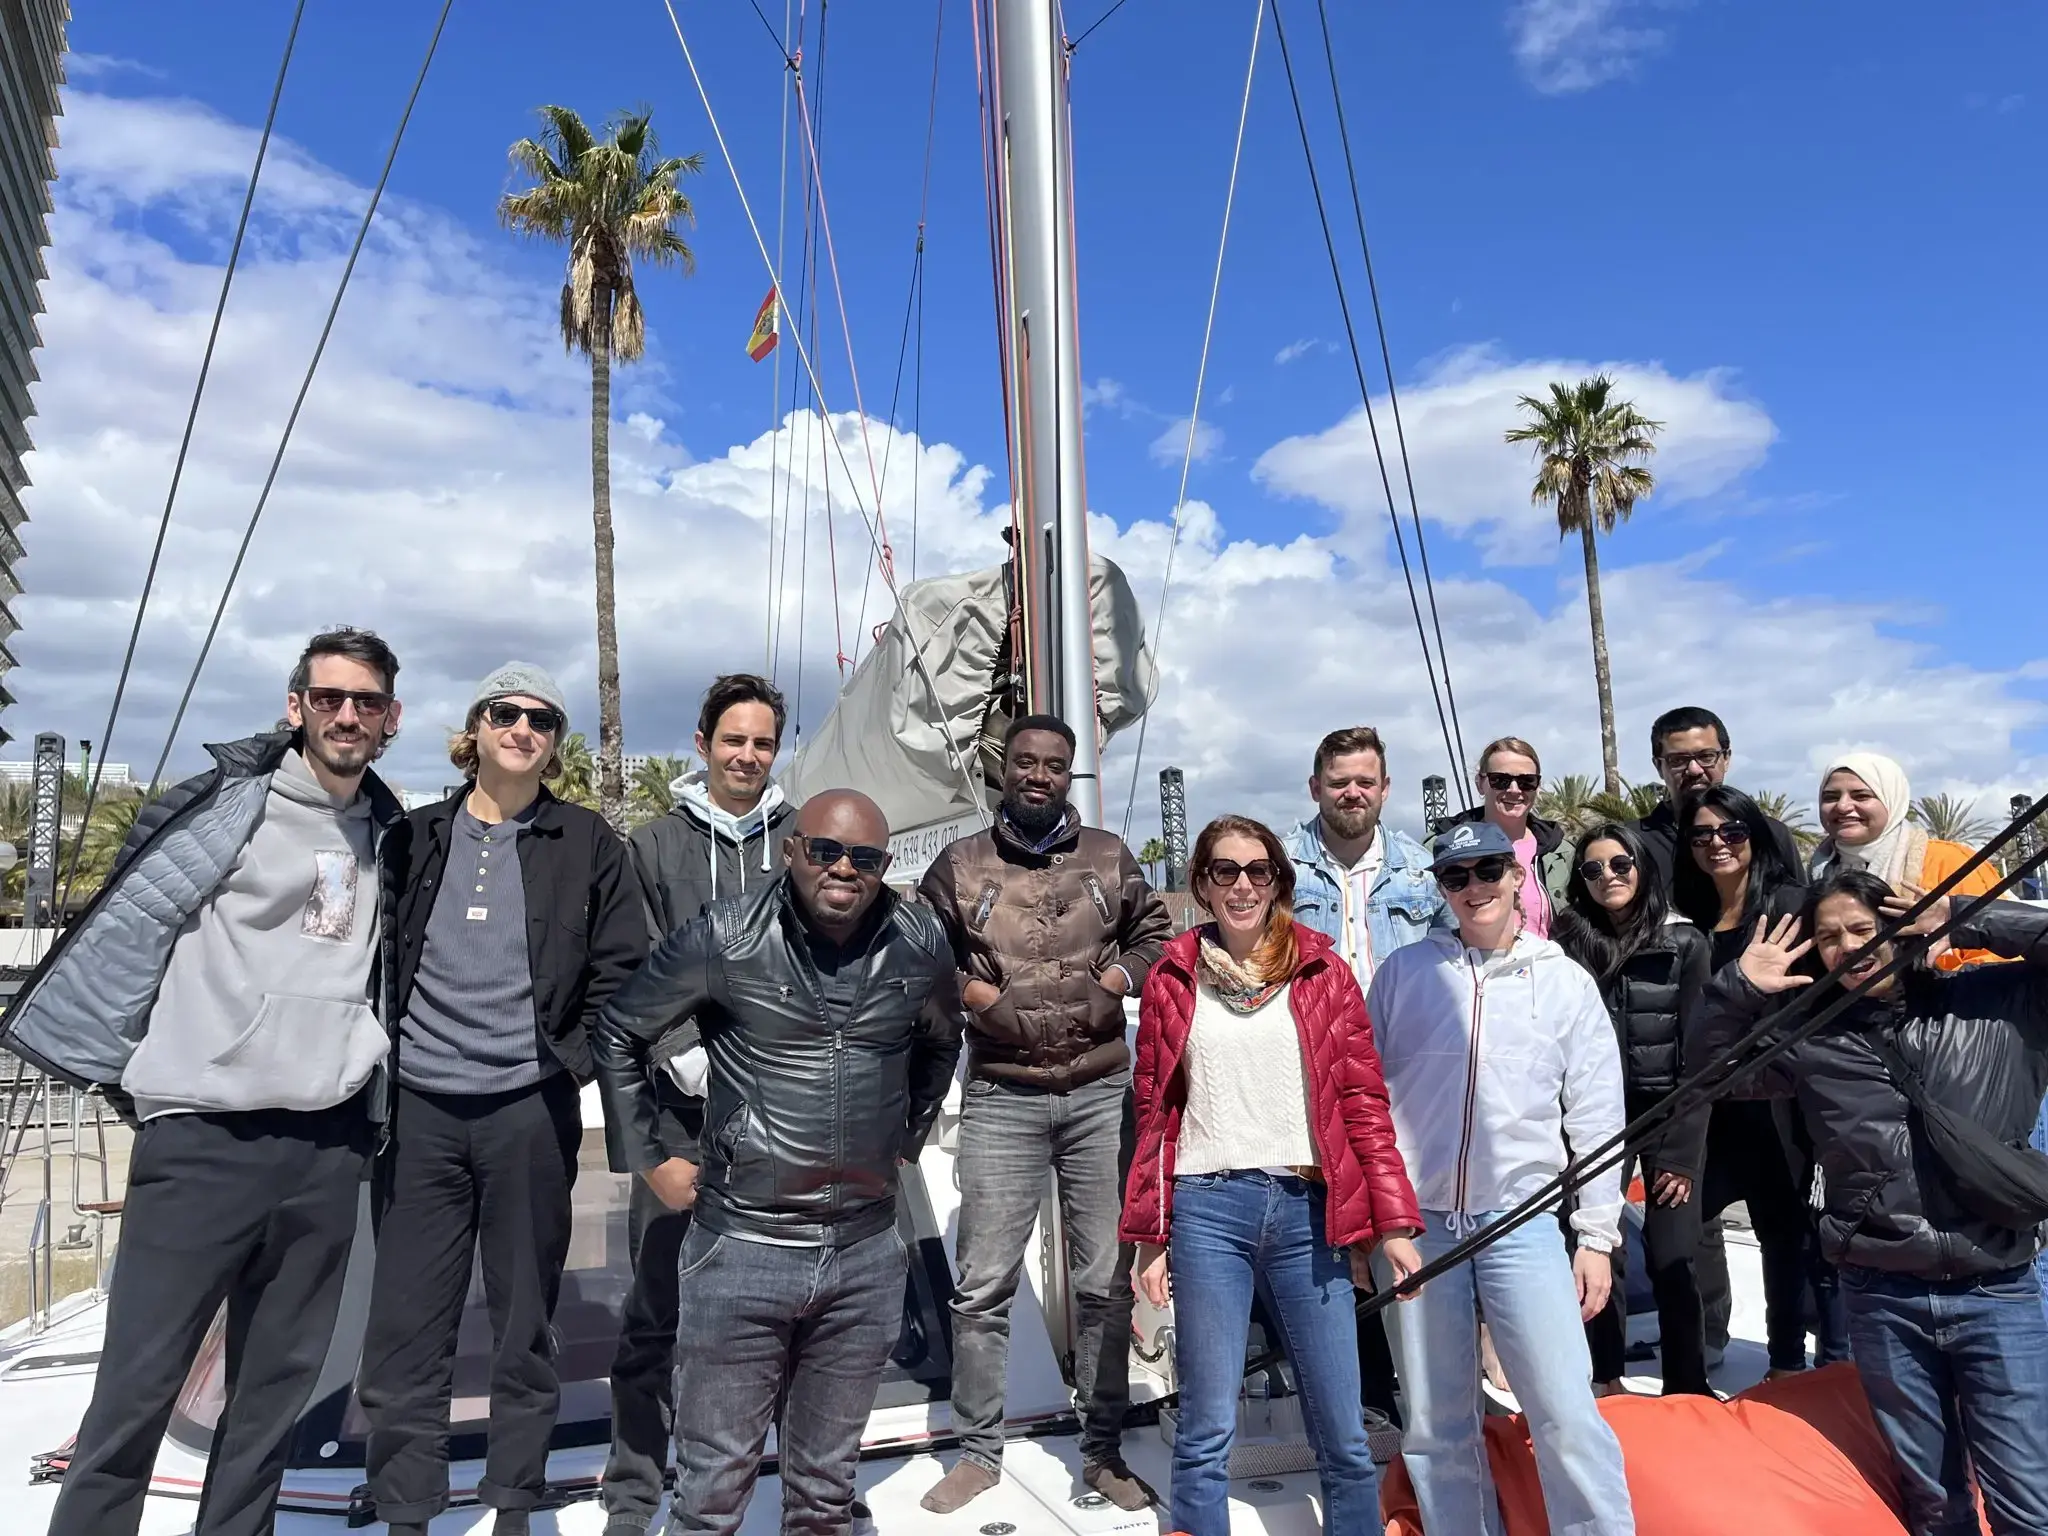 The ORN fellows pose for a photo on a boat